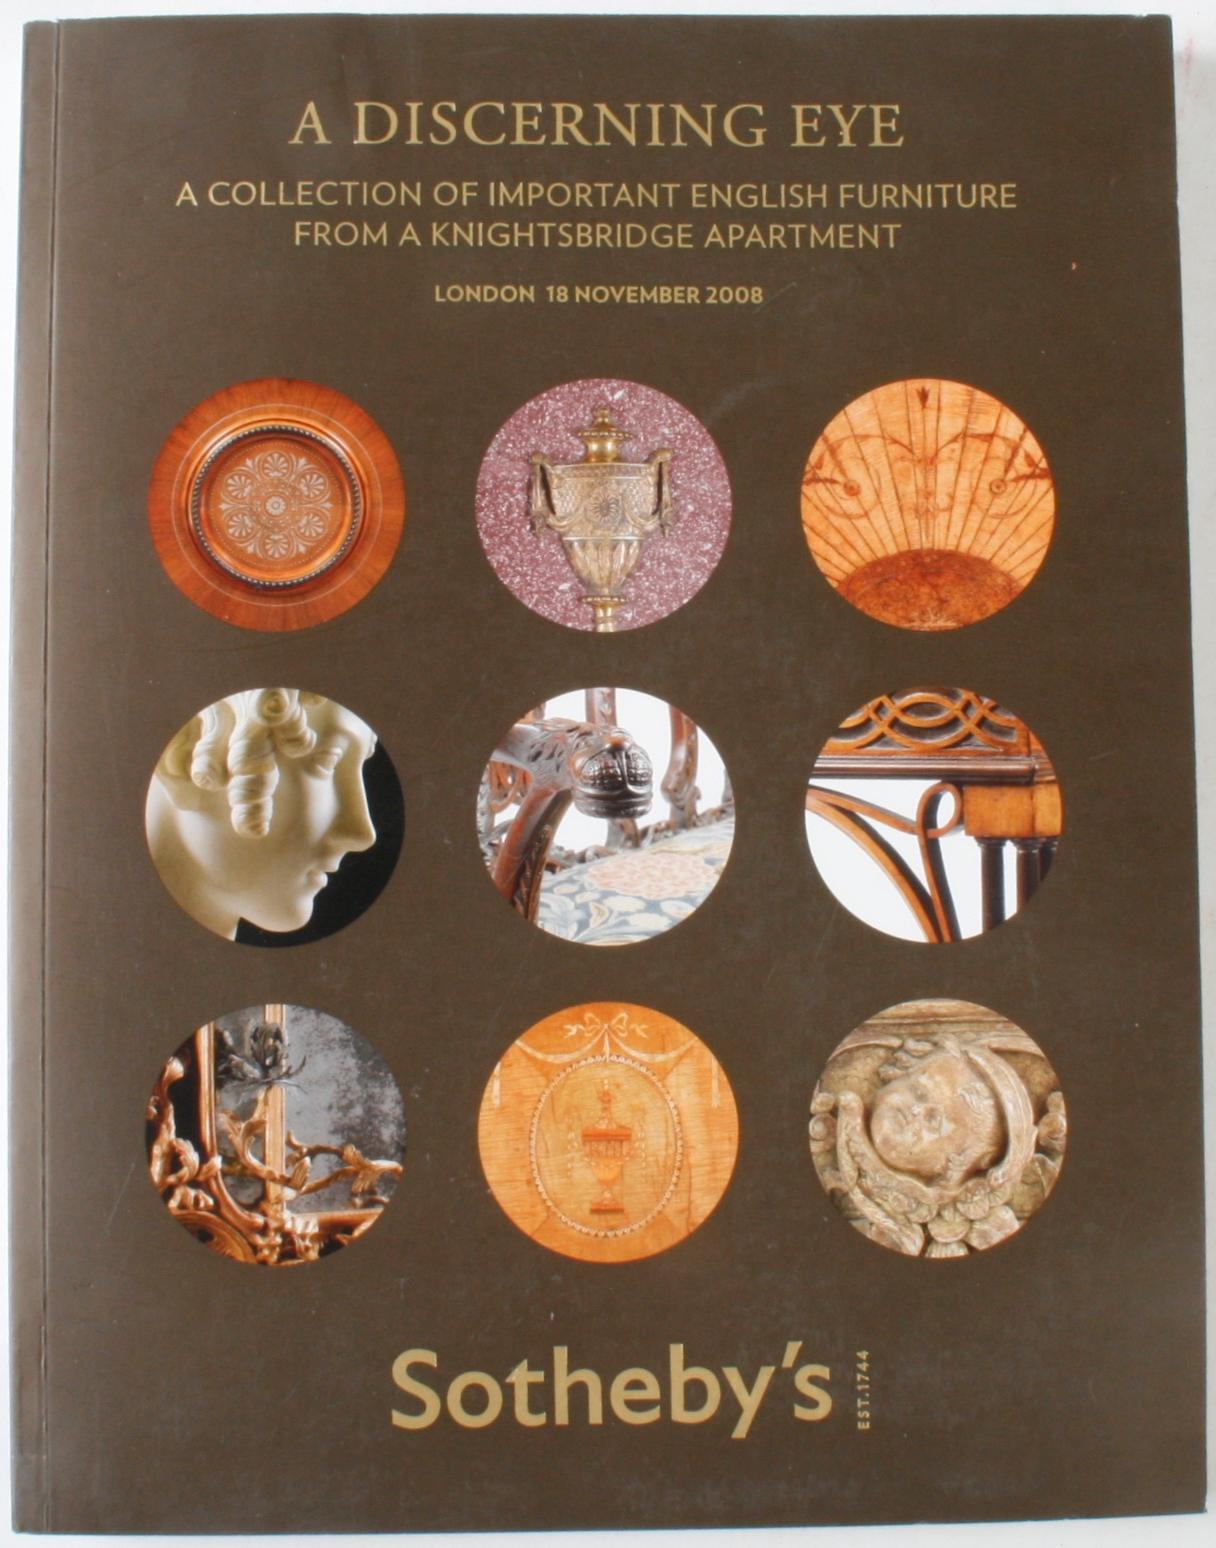 Sotheby's; A Double Catalogue, A Discerning Eye, a collection of important English furniture from A Knightsbridge Apartment and Property from the Estate of the Late Lady Samuel of Wych Cross. London: Sotheby's, 2008. 132/131 pp. Two single-owner